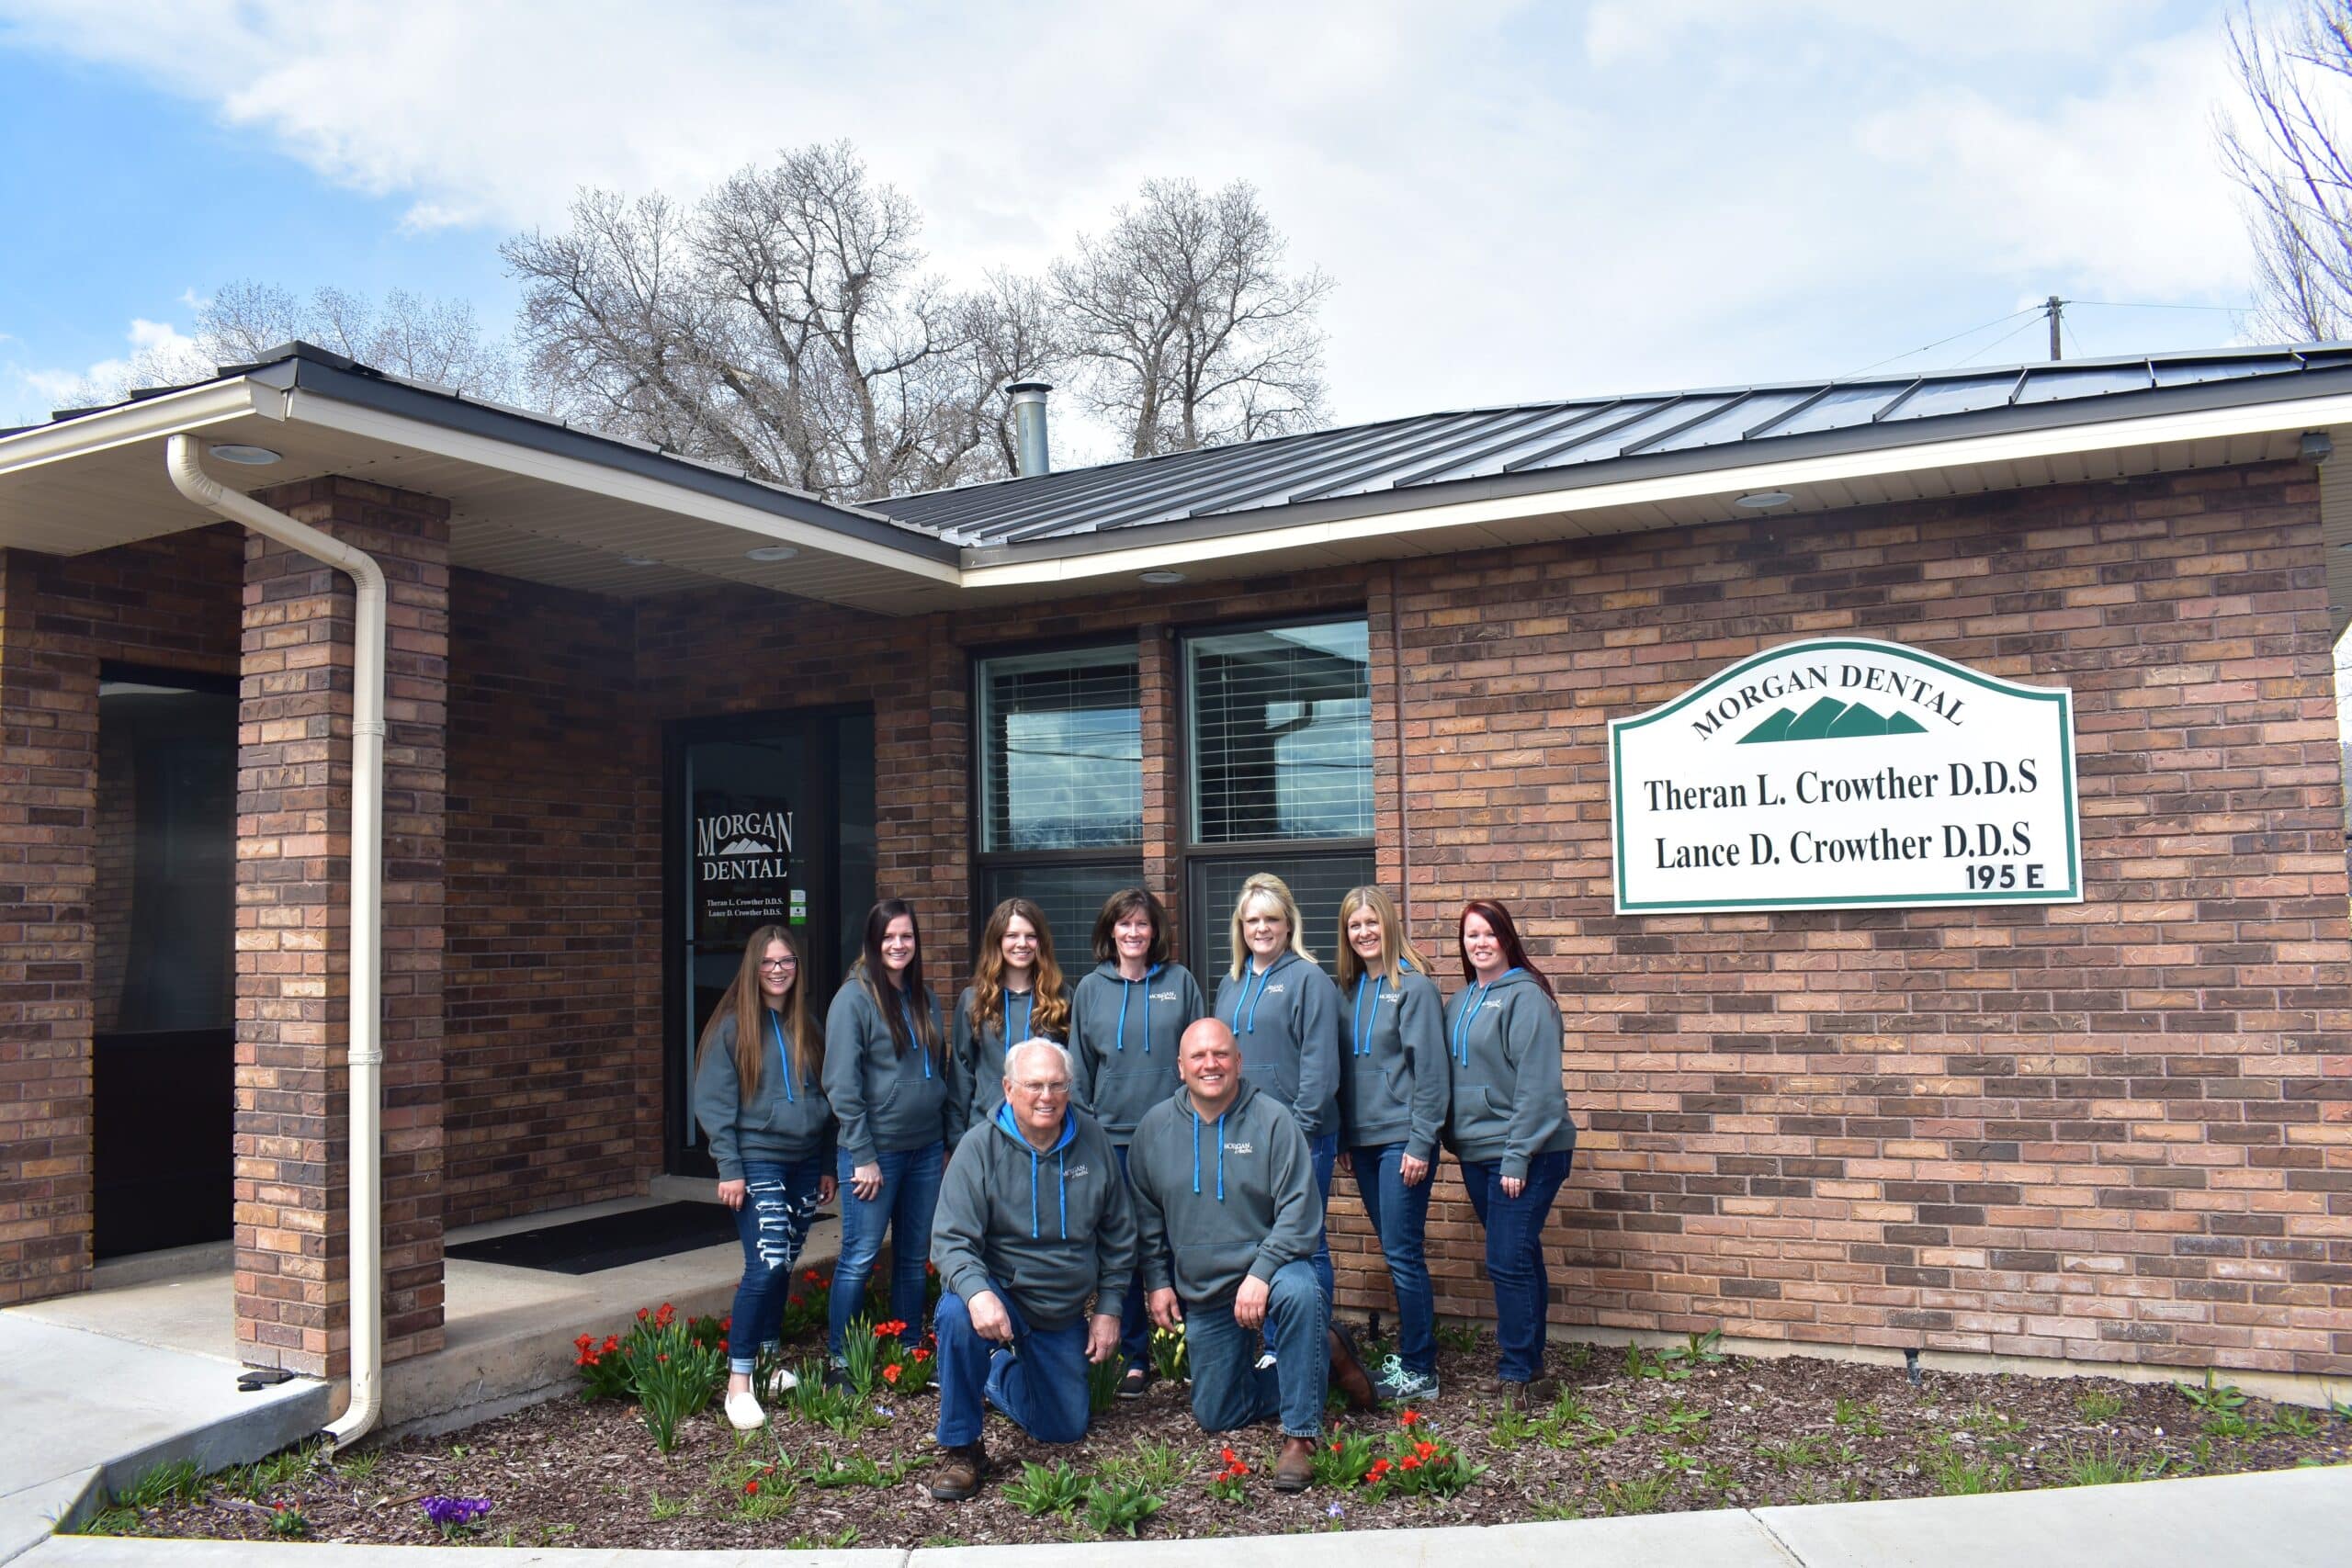 home dentist in morgan utah Lance D Crowther dds Theran L Crowther dds